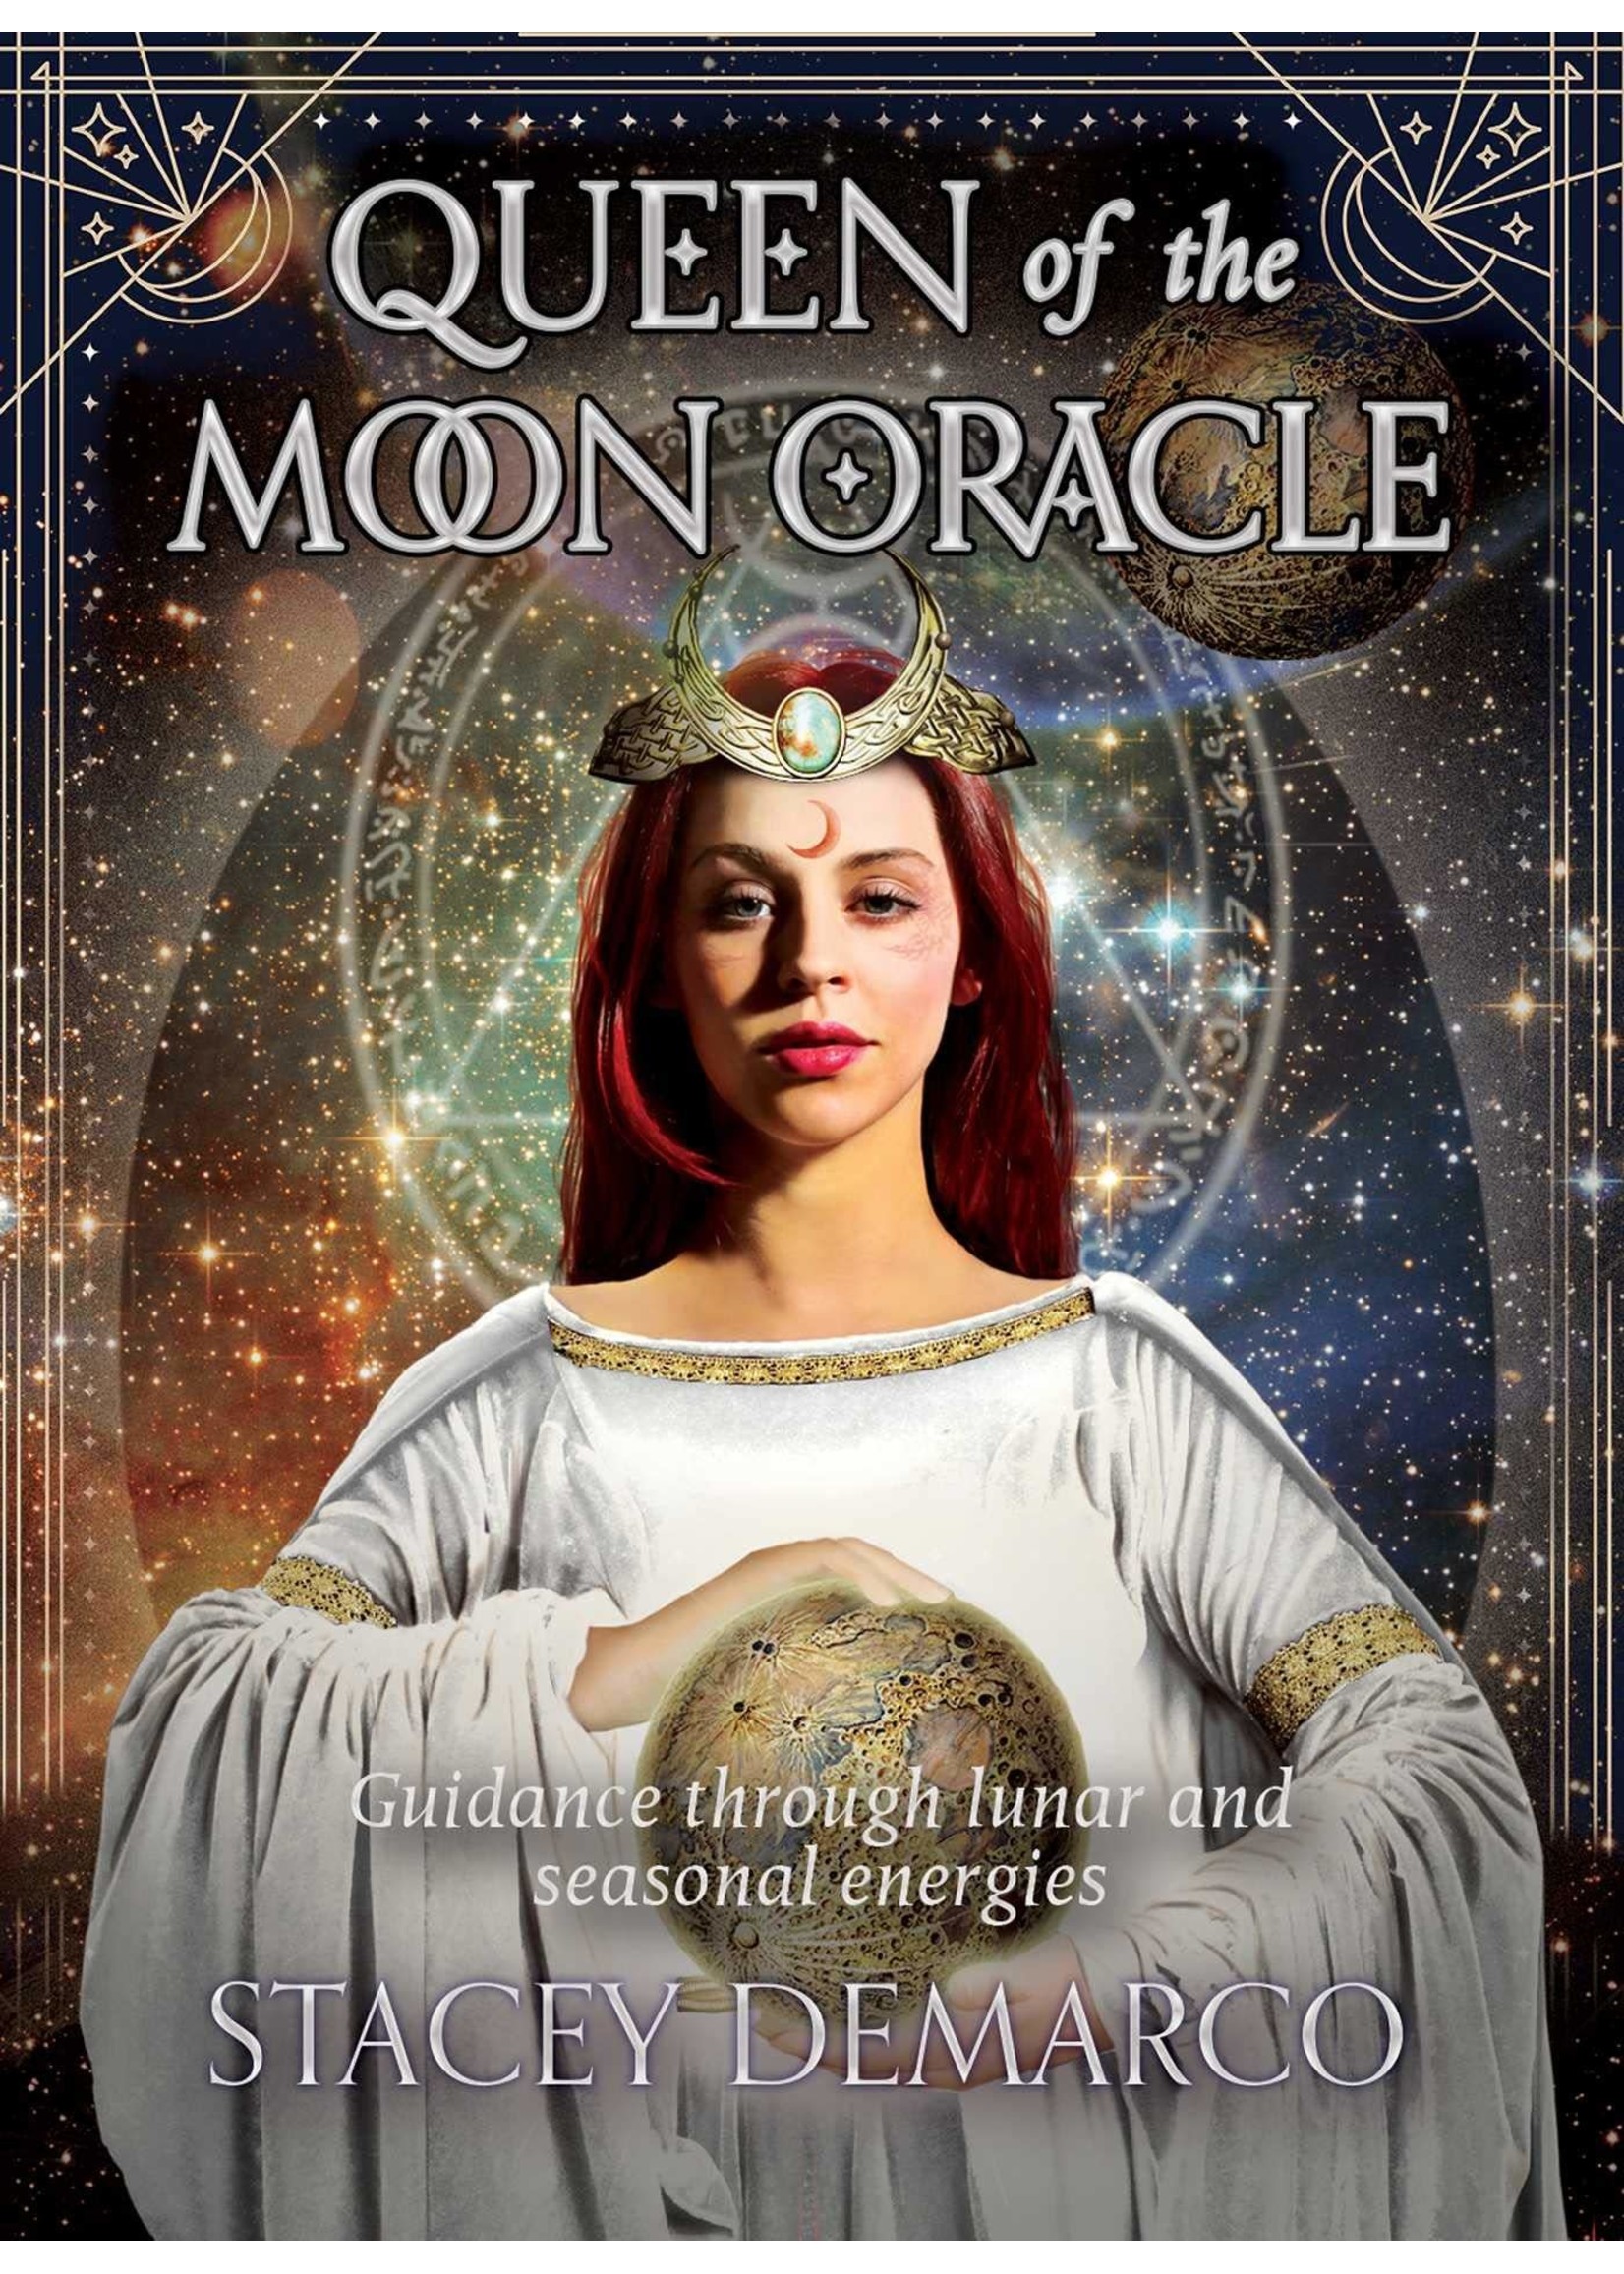 Deck Queen of the Moon Oracle